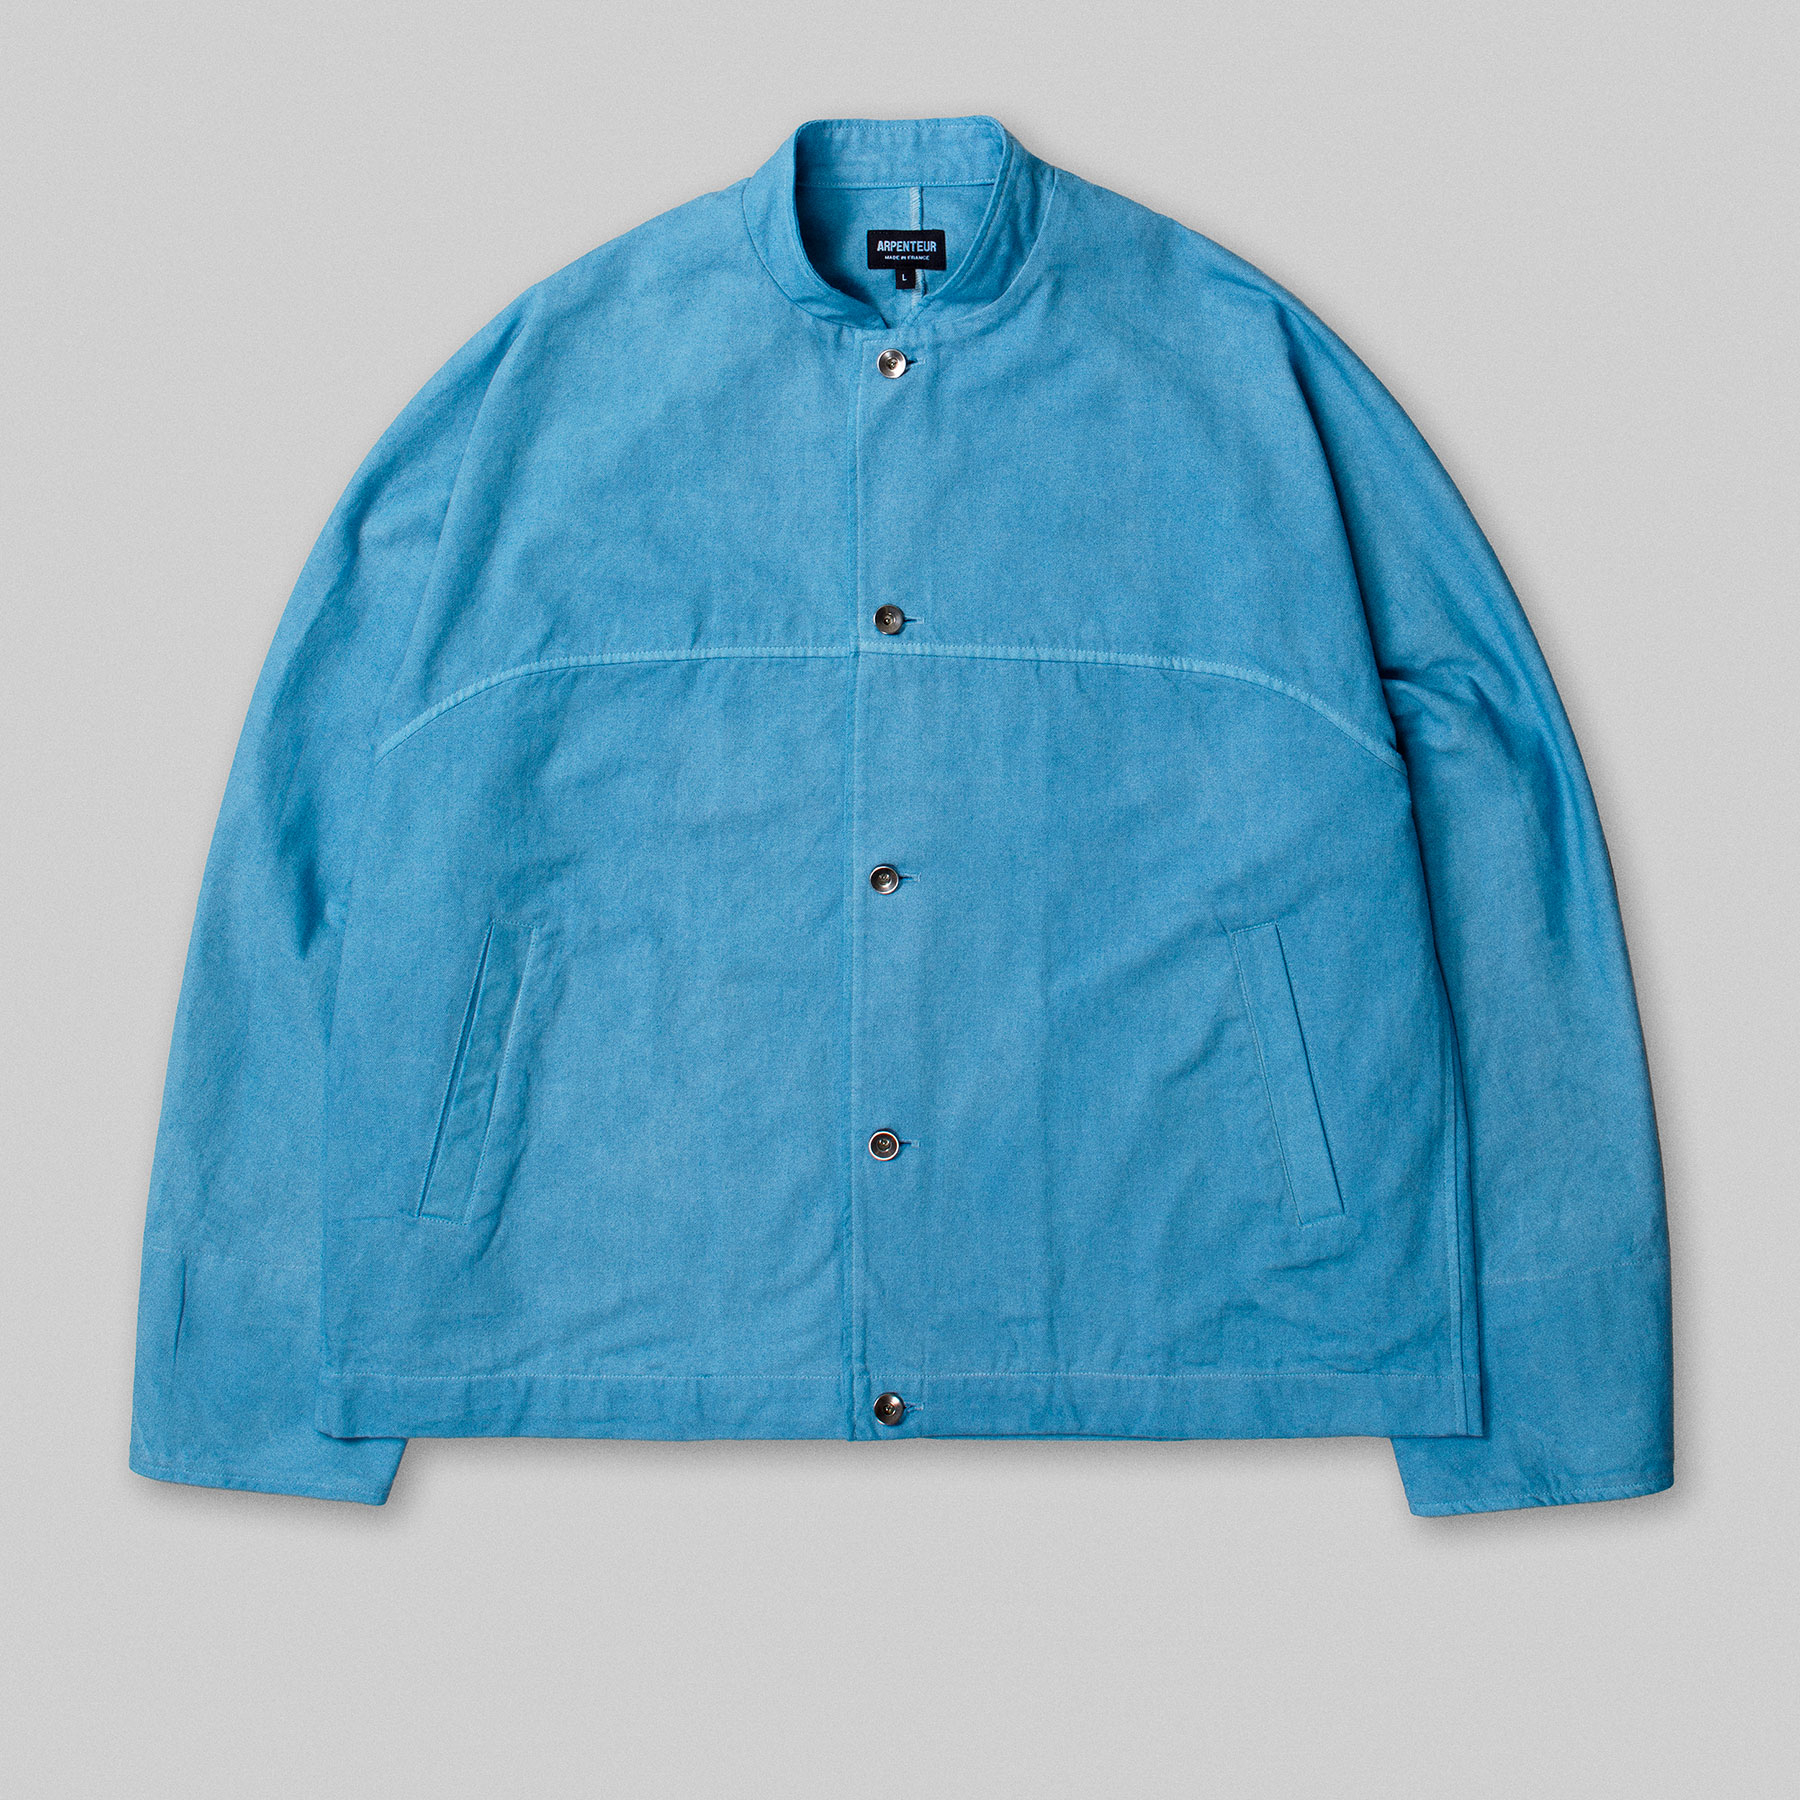 EVO Jacket by Arpenteur in Ice woad color